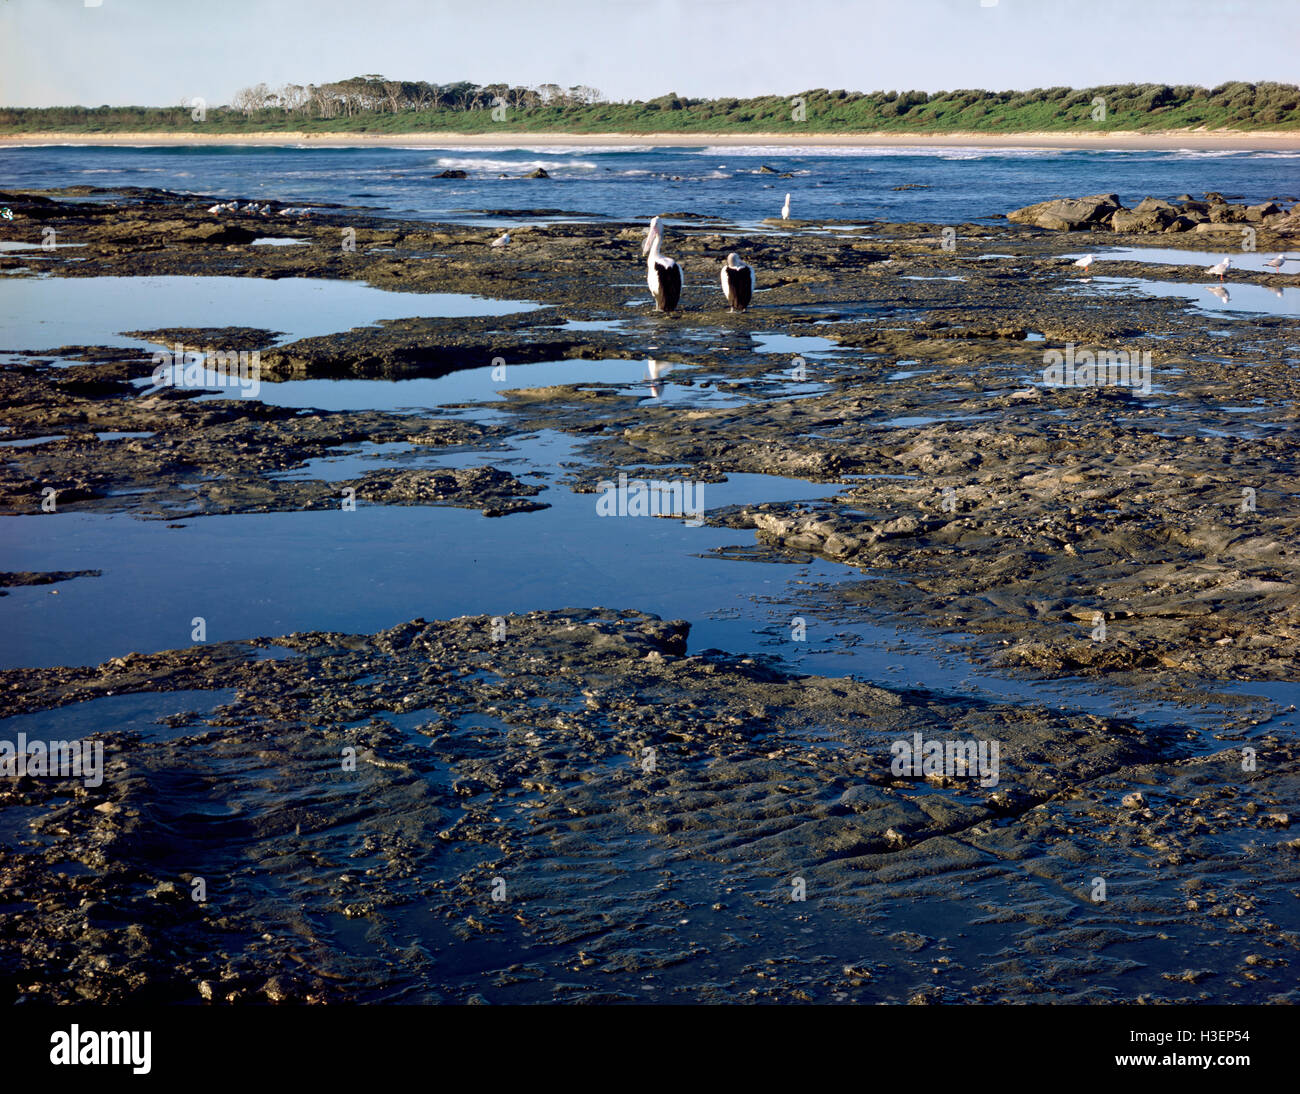 Rock platform at low tide with pelicans. Bundjalung National Park, New South Wales, Australia Stock Photo